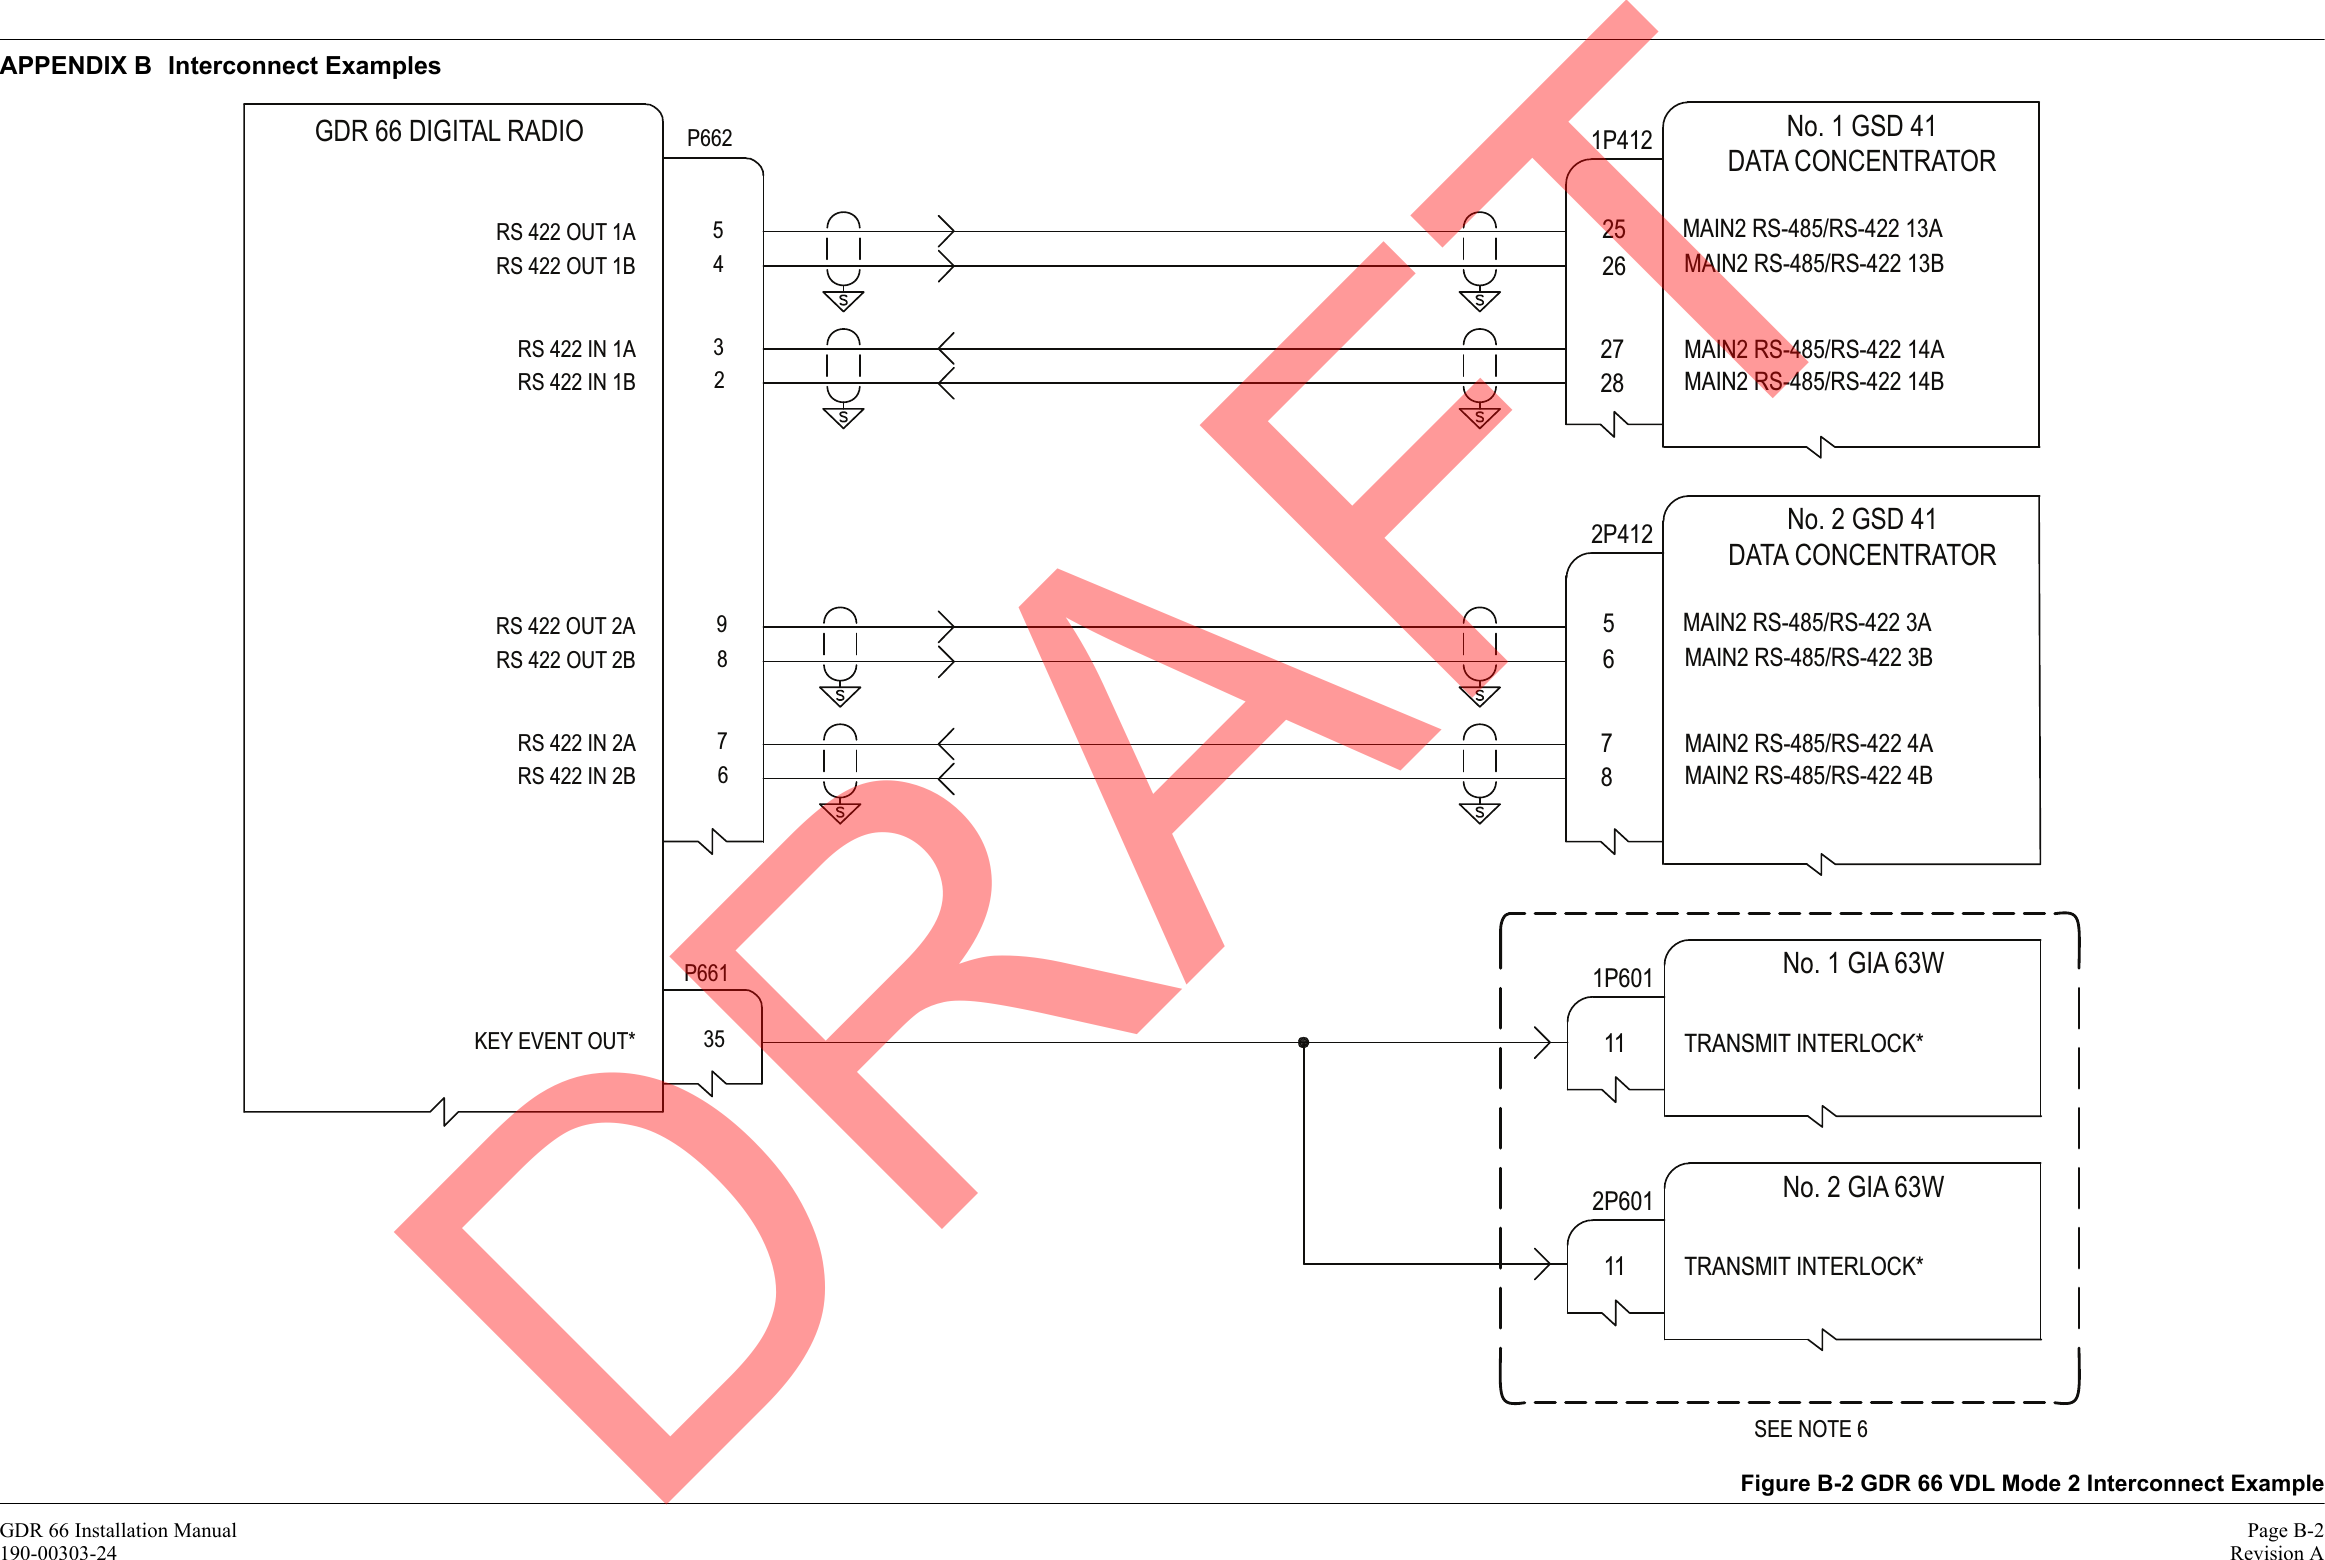 GDR 66 Installation Manual Page B-2190-00303-24 Revision AAPPENDIX B Interconnect ExamplesFigure B-2 GDR 66 VDL Mode 2 Interconnect Example5432GDR 66 DIGITAL RADIO P662RS 422 OUT 1A RS 422 OUT 1B  RS 422 IN 1A RS 422 IN 1B No. 1 GSD 41DATA CONCENTRATOR1P4122625 MAIN2 RS-485/RS-422 13AMAIN2 RS-485/RS-422 13B2728MAIN2 RS-485/RS-422 14AMAIN2 RS-485/RS-422 14BNo. 2 GSD 41DATA CONCENTRATOR2P41265MAIN2 RS-485/RS-422 3AMAIN2 RS-485/RS-422 3B78MAIN2 RS-485/RS-422 4AMAIN2 RS-485/RS-422 4B9876RS 422 OUT 2A RS 422 OUT 2B  RS 422 IN 2A RS 422 IN 2B No. 1 GIA 63W1P60111 TRANSMIT INTERLOCK*No. 2 GIA 63W2P60111 TRANSMIT INTERLOCK*P66135KEY EVENT OUT* SEE NOTE 6 DRAFT